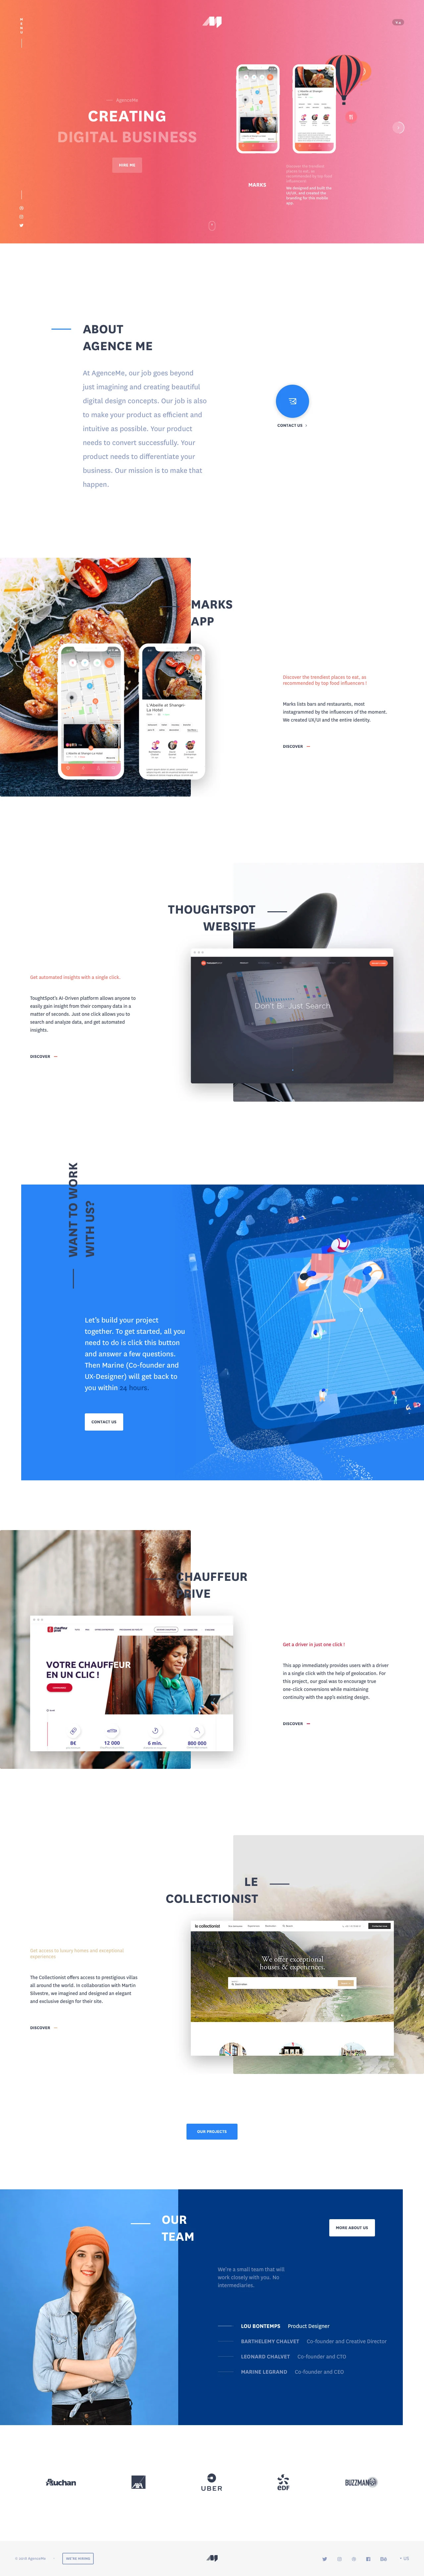 AgenceMe Landing Page Example: At AgenceMe, our job goes beyond just imagining and creating beautiful digital design concepts. Our job is also to make your product as efficient and intuitive as possible.a